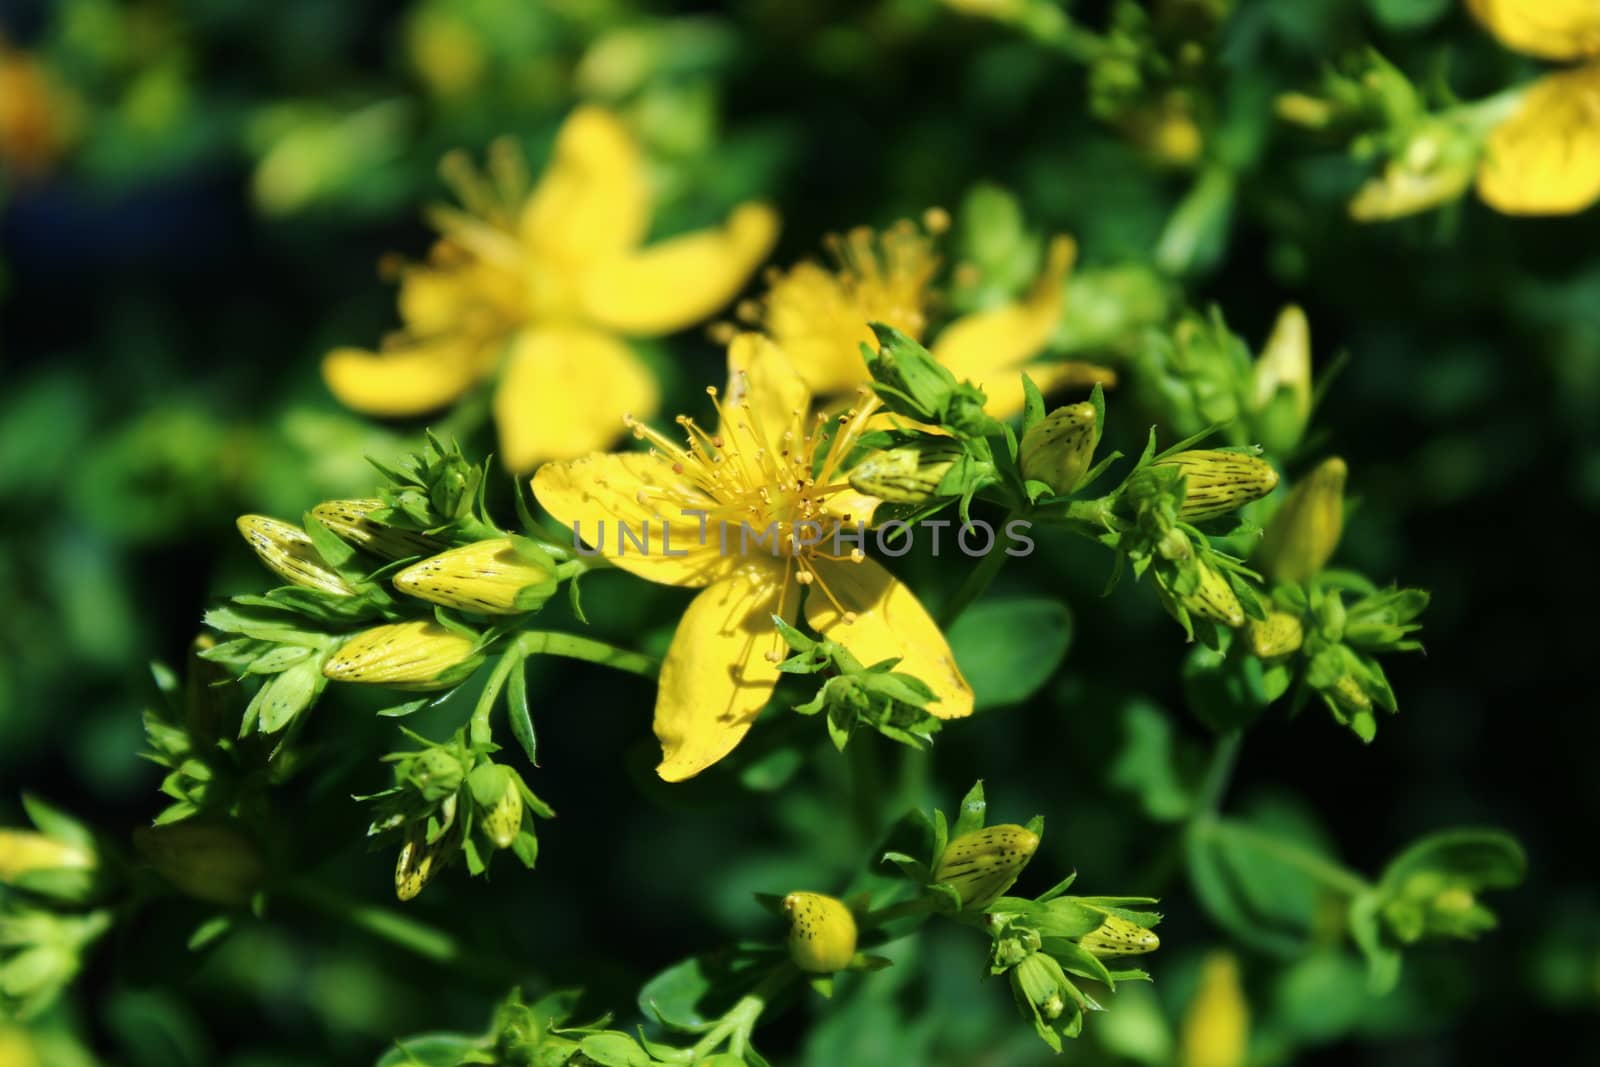 The picture shows St John's wort in the meadow